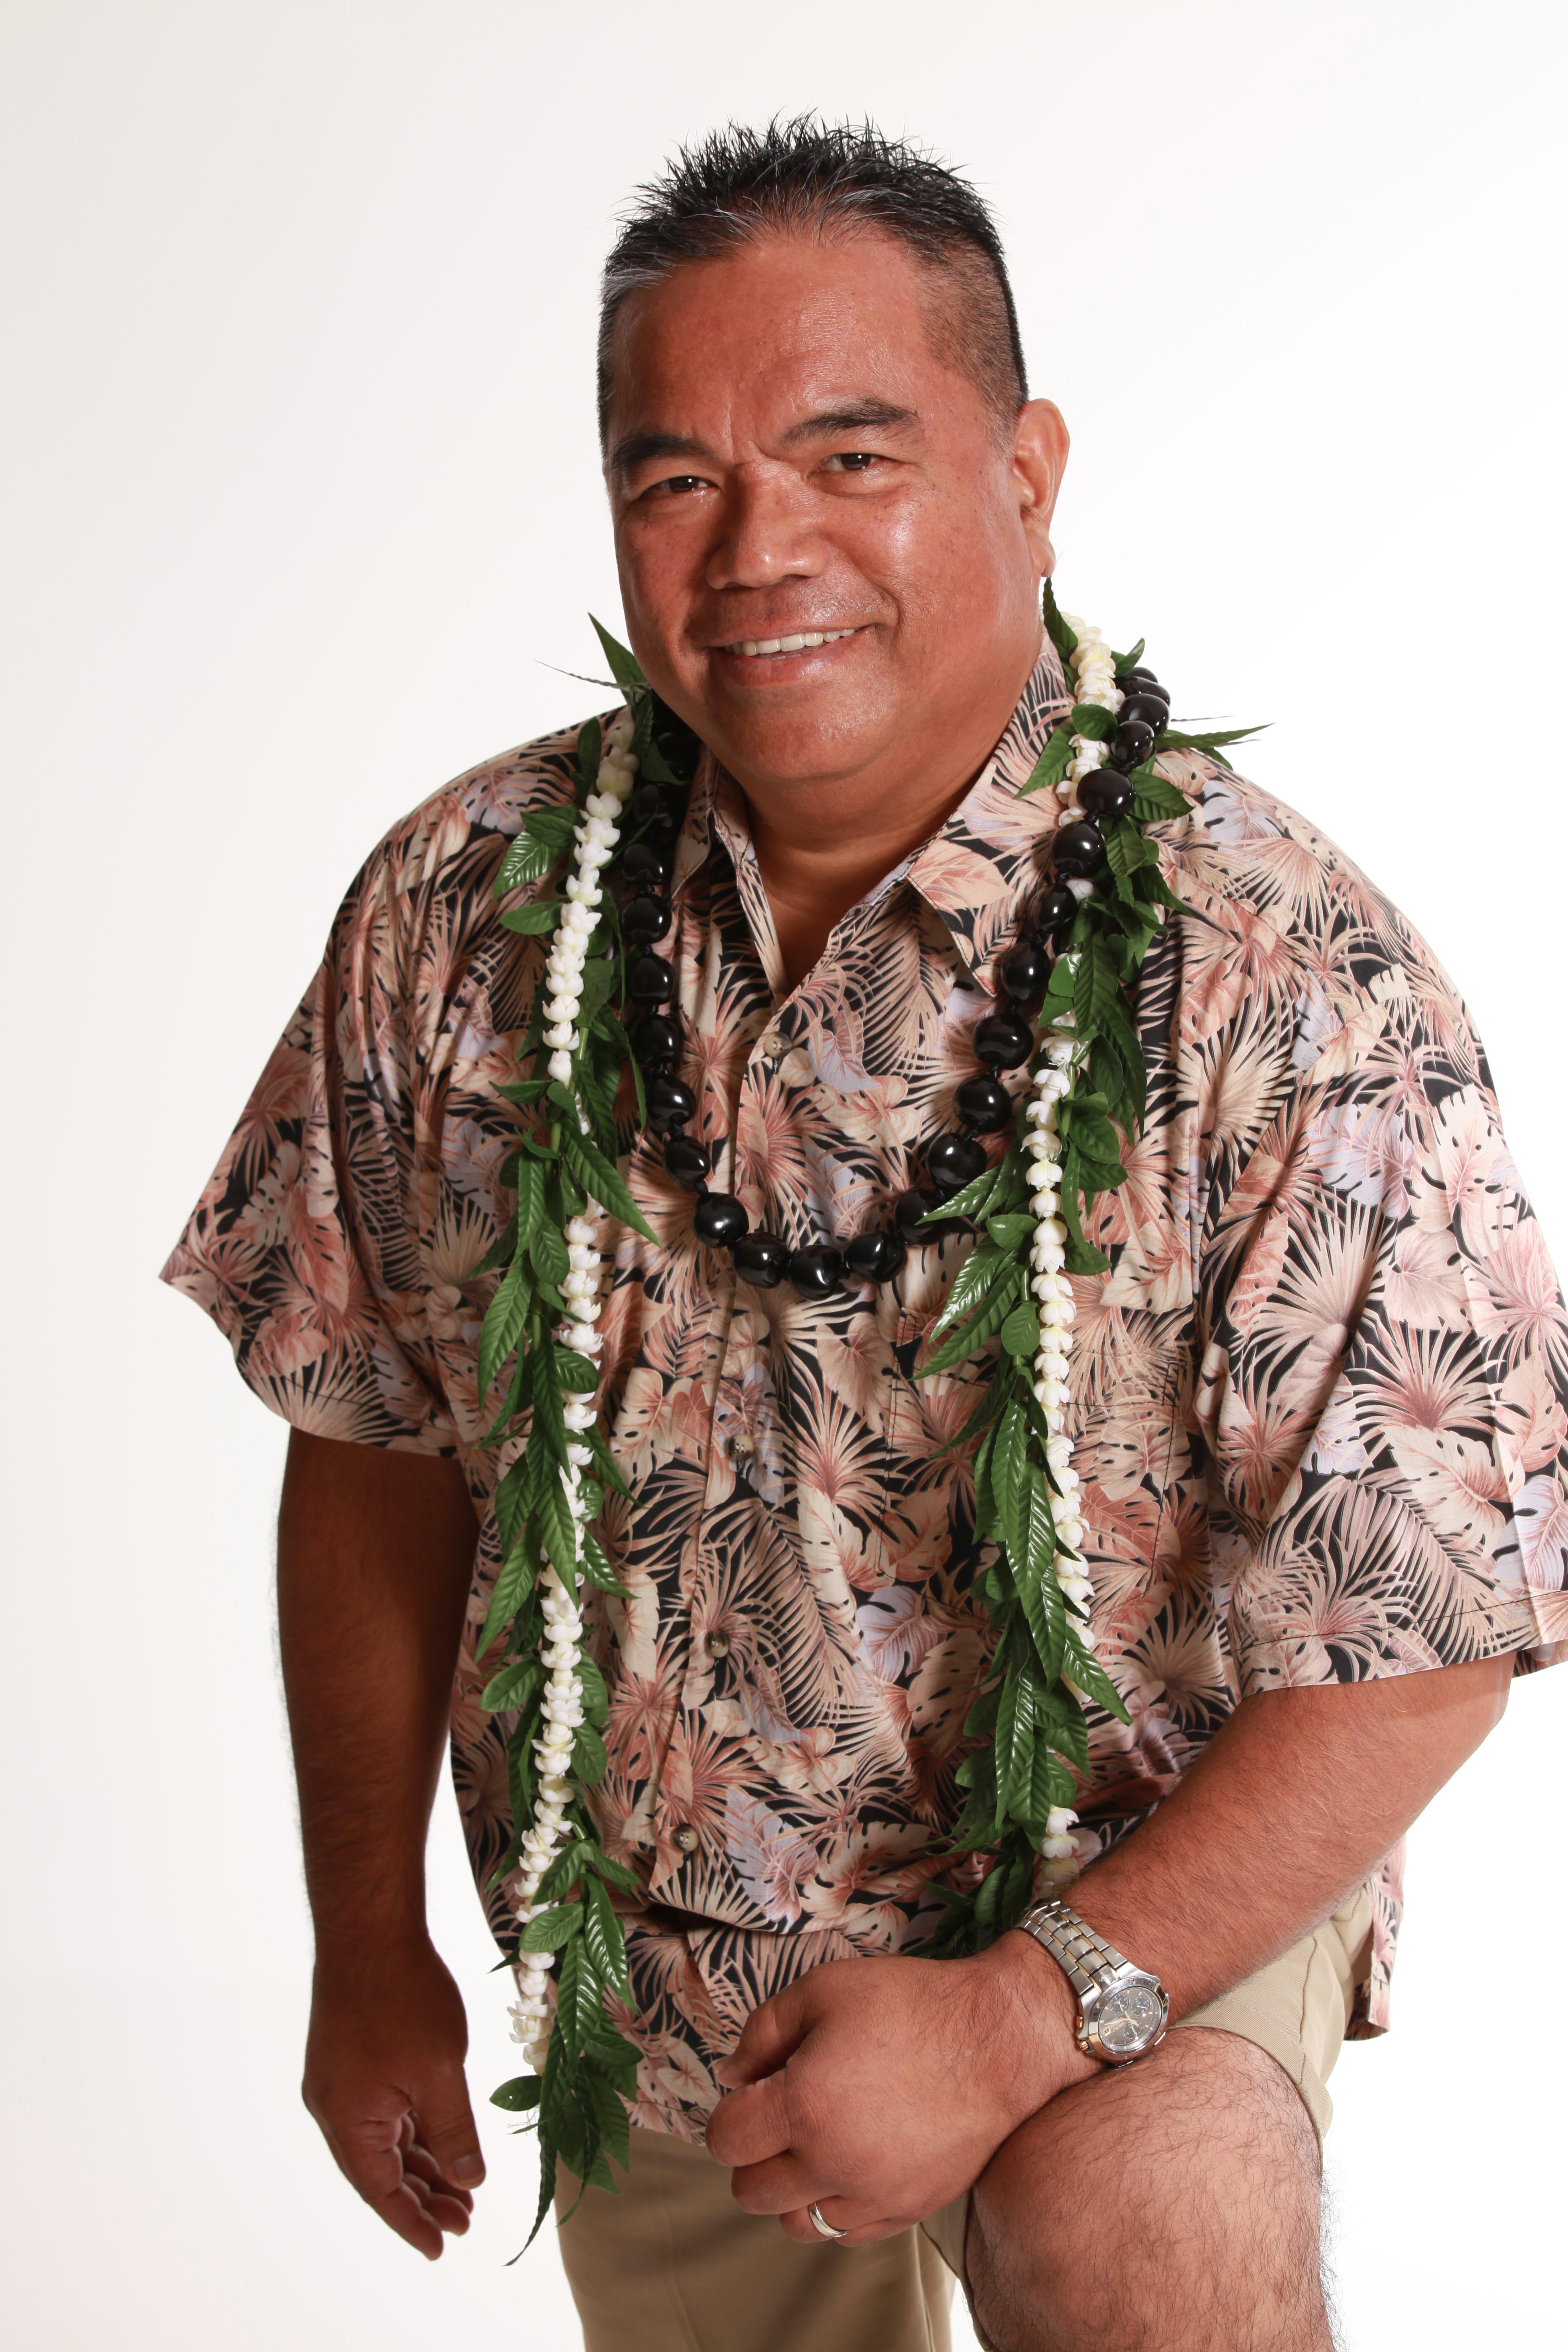 Born and raised on the Big Island of Hawaii, Mike grew up with a strong sense of 